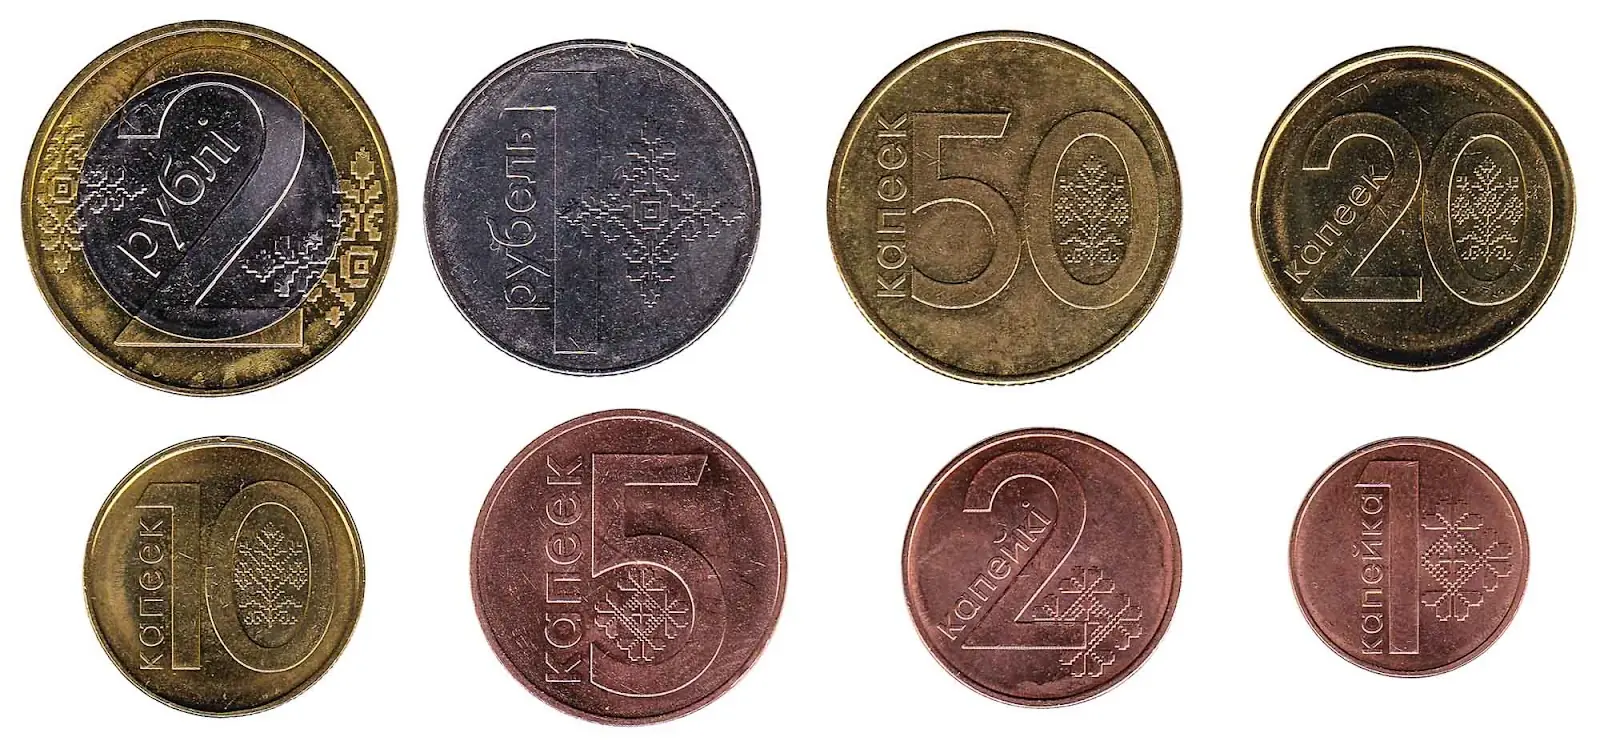 Belarus ruble coin series